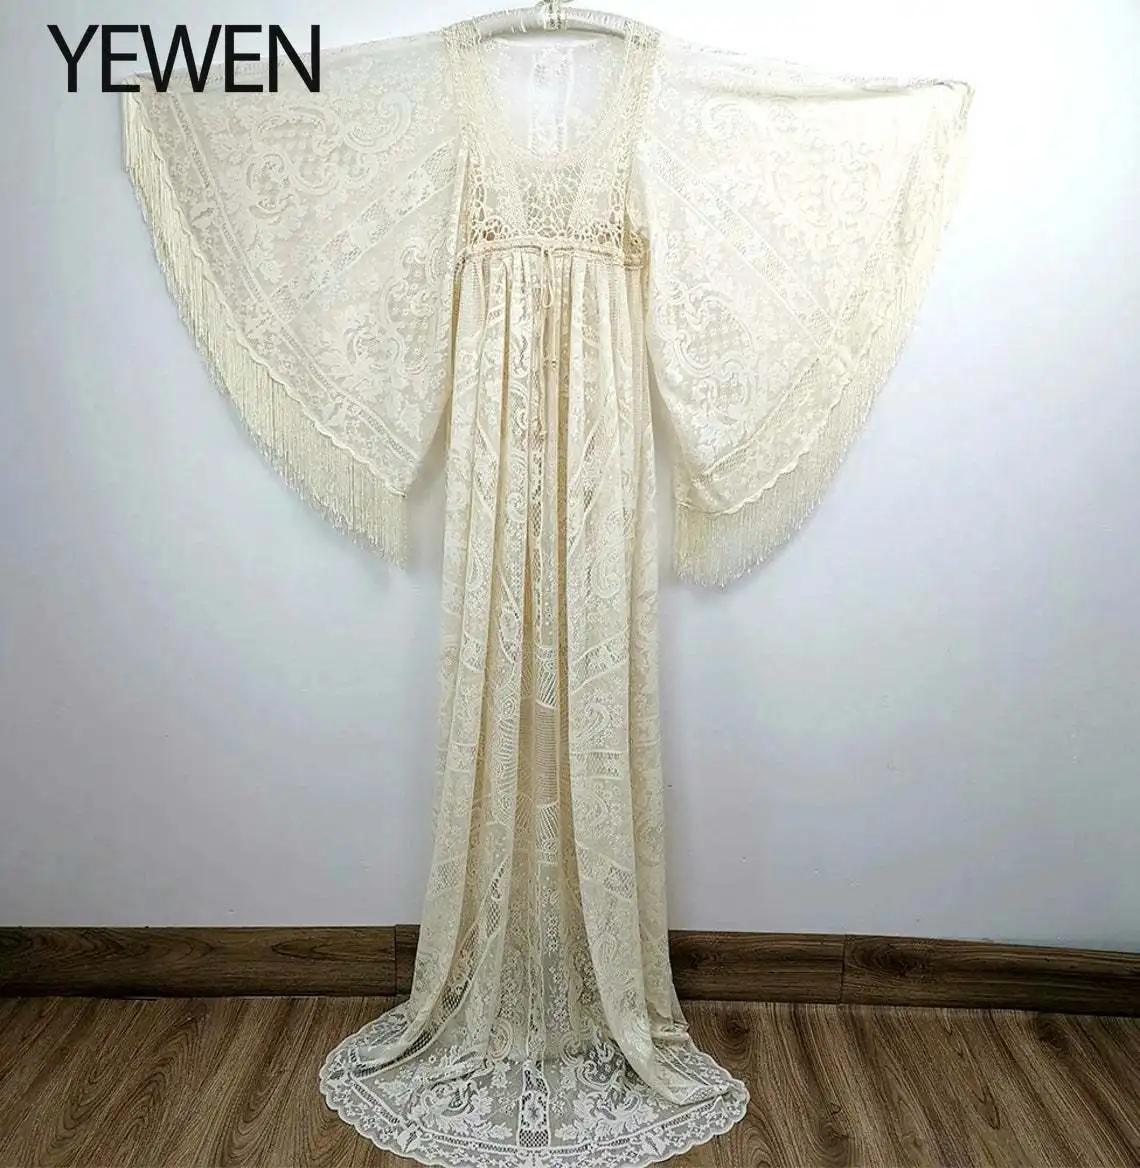 

YEWEN V Neck Strech Lace Long Flared Sleeves Dress for Photoshoot Evening Gowns Outside Beach Photo Shooting Dresses 2021